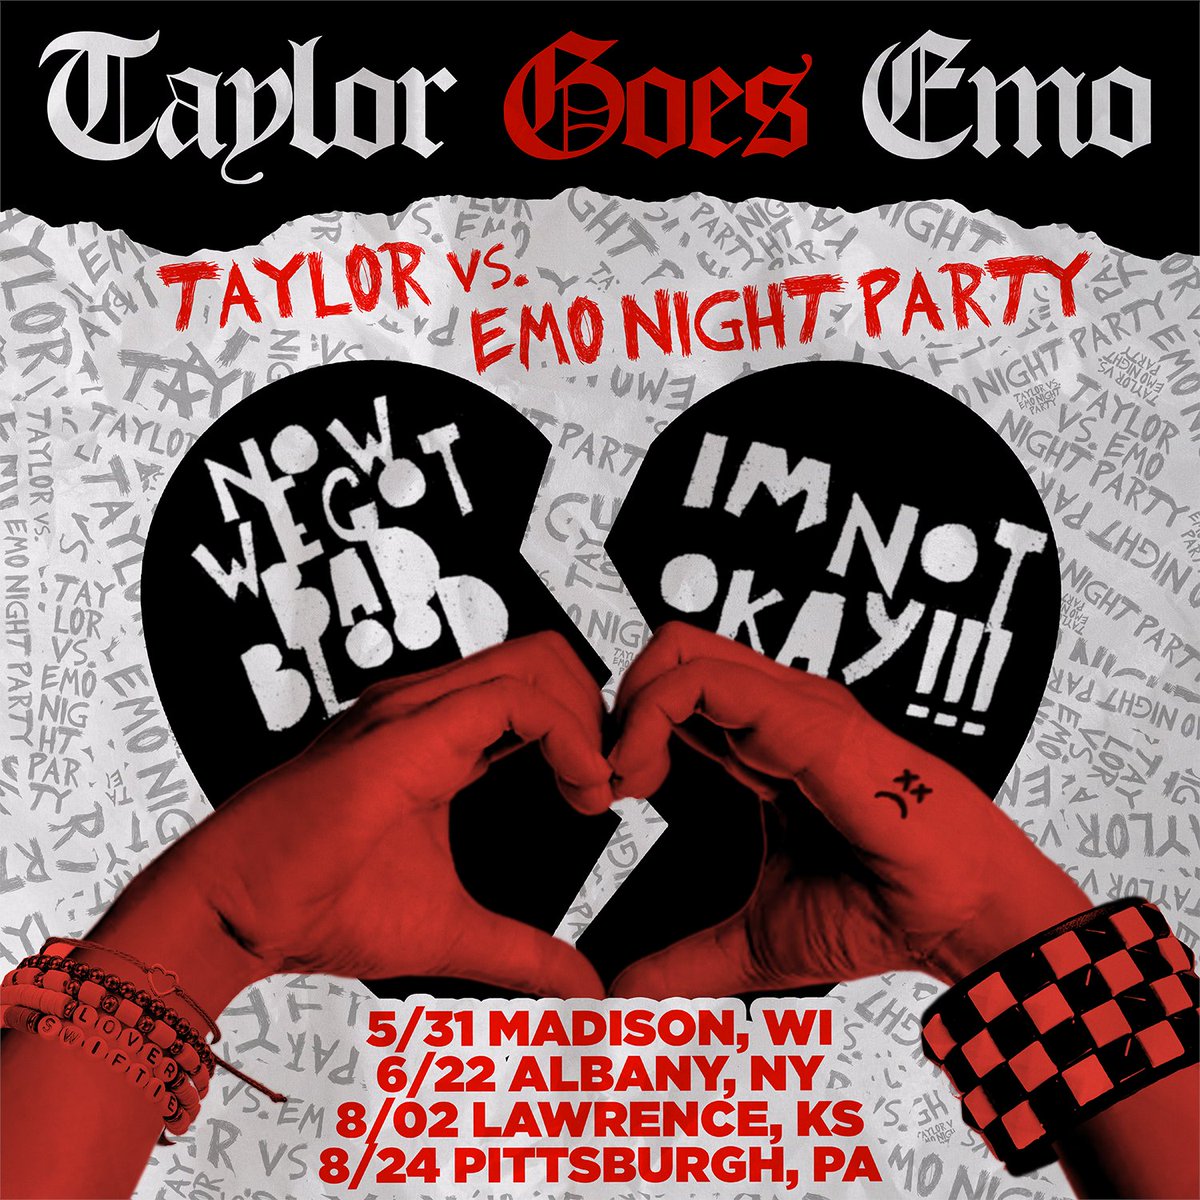 Just announced! 🔥🔥 4 new shows in honor of Taylor name checking emo/pop-punk legends THE STARTING LINE 💥🎤oN sAlE tHiS fRiDaY 🤍⚡️ #taylorswift #emo